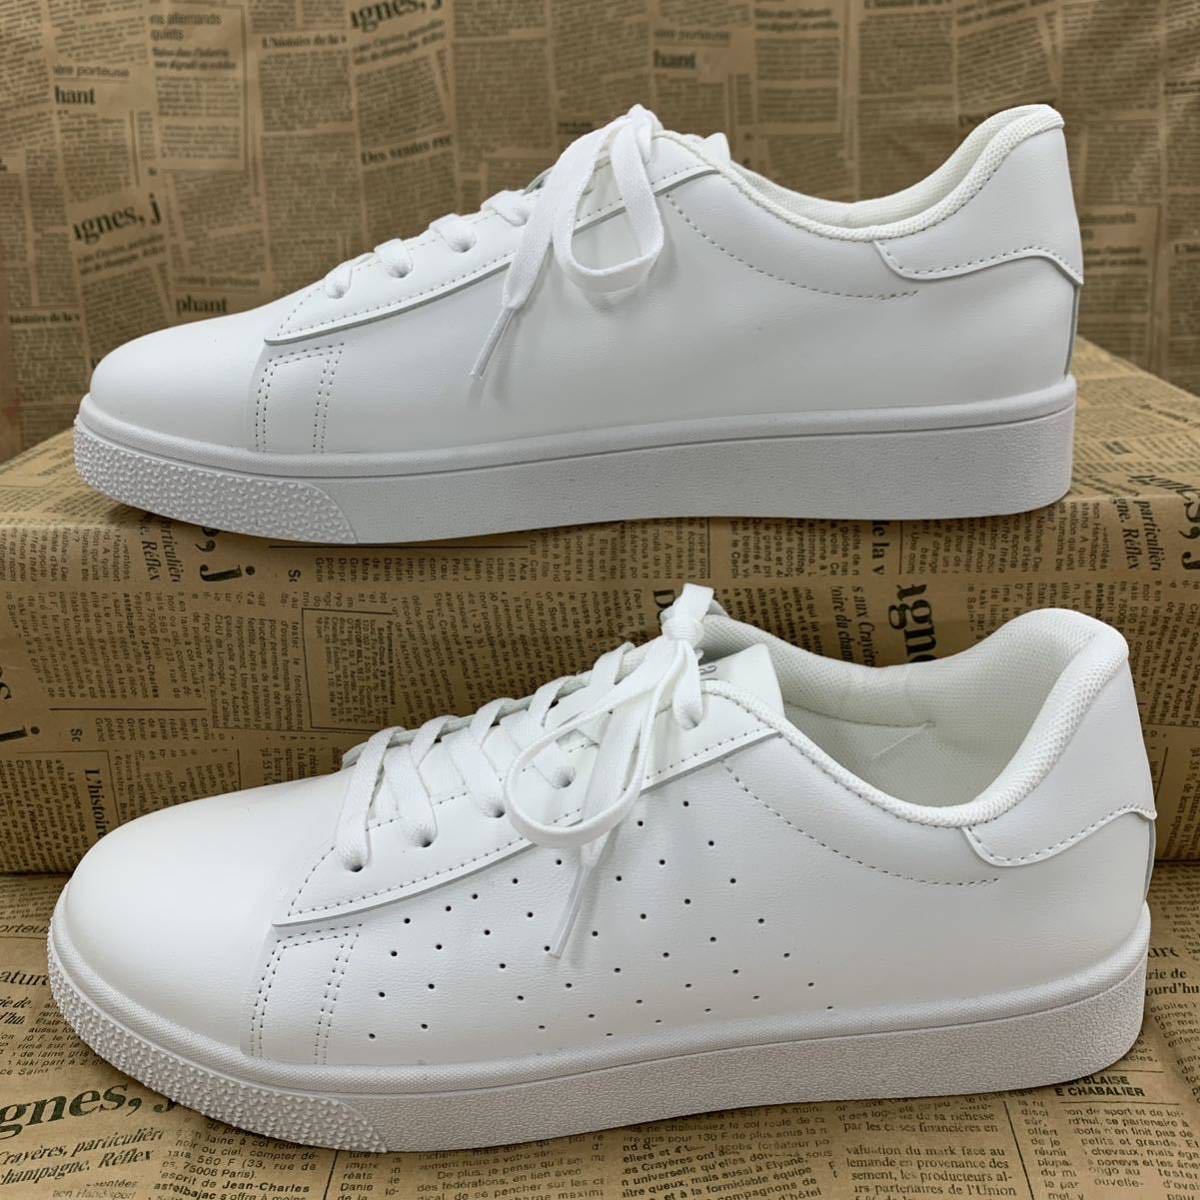  new goods men's 27.0cm light weight fake leather sneakers fake leather shoes coat sneakers water-repellent sneakers white osw2415